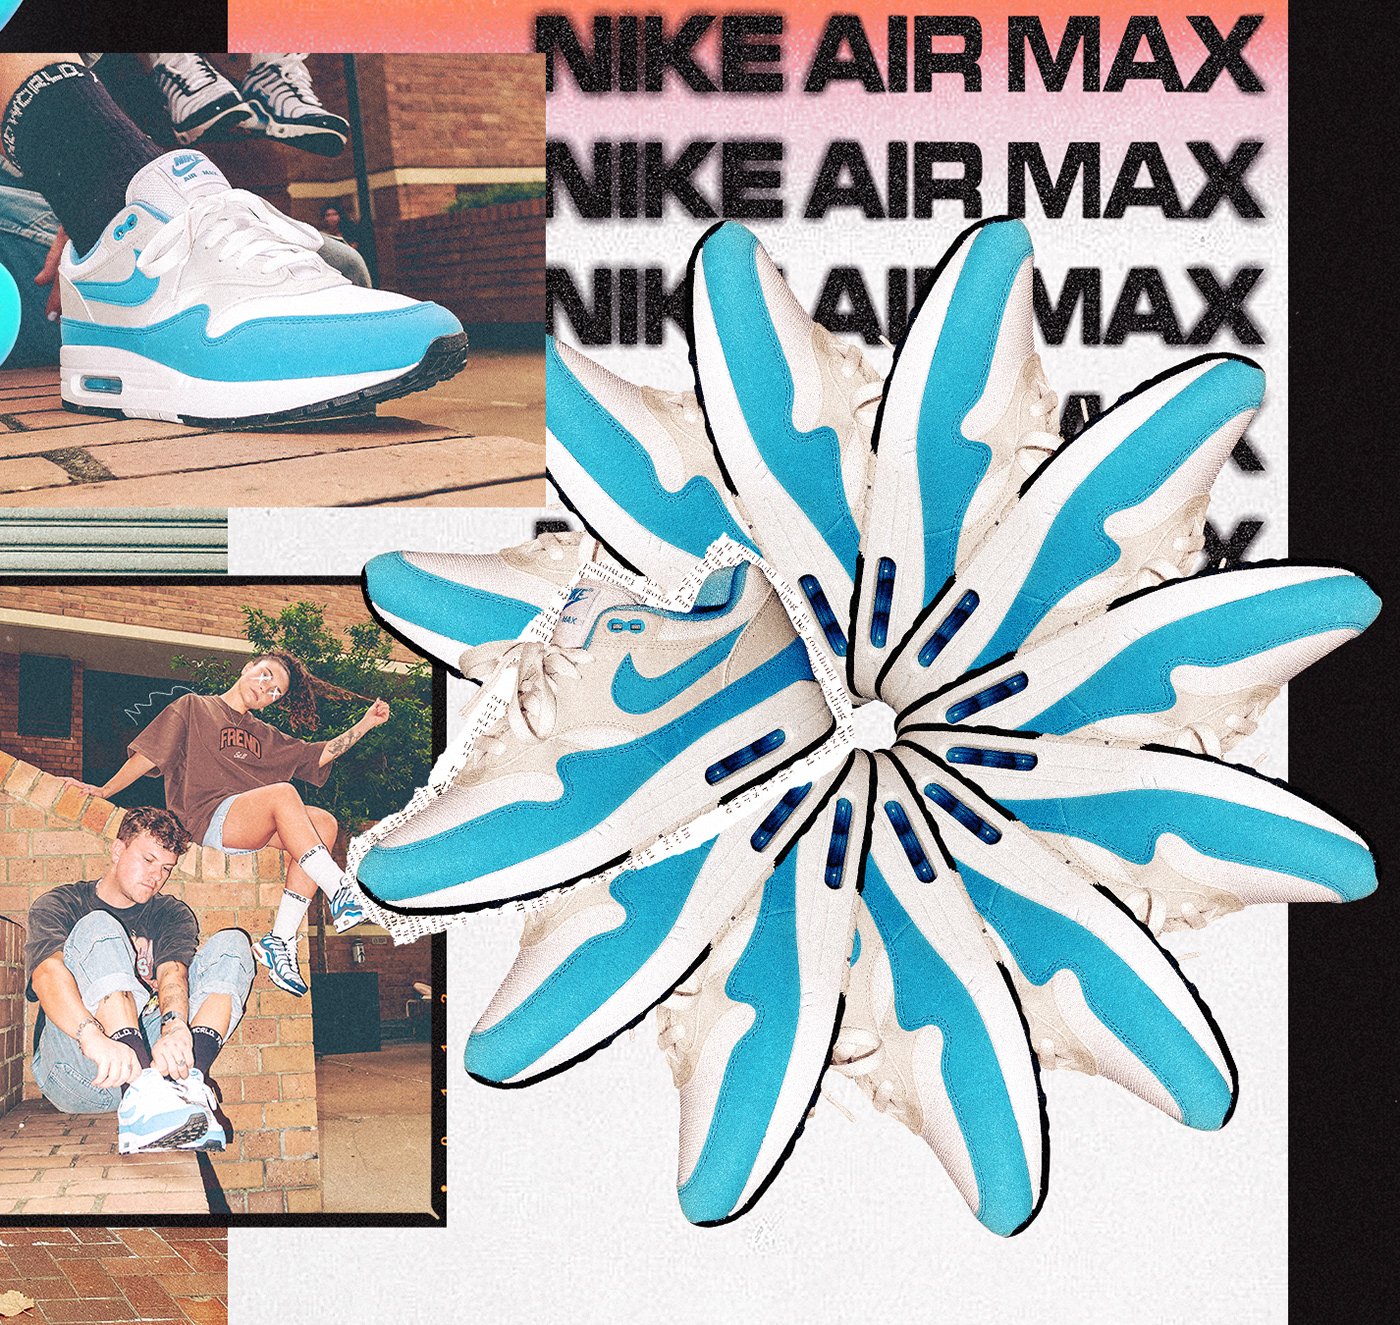 Nike airmax sneakers Fashion  Photography  graphic design  branding  typography   Poster Design visual identity